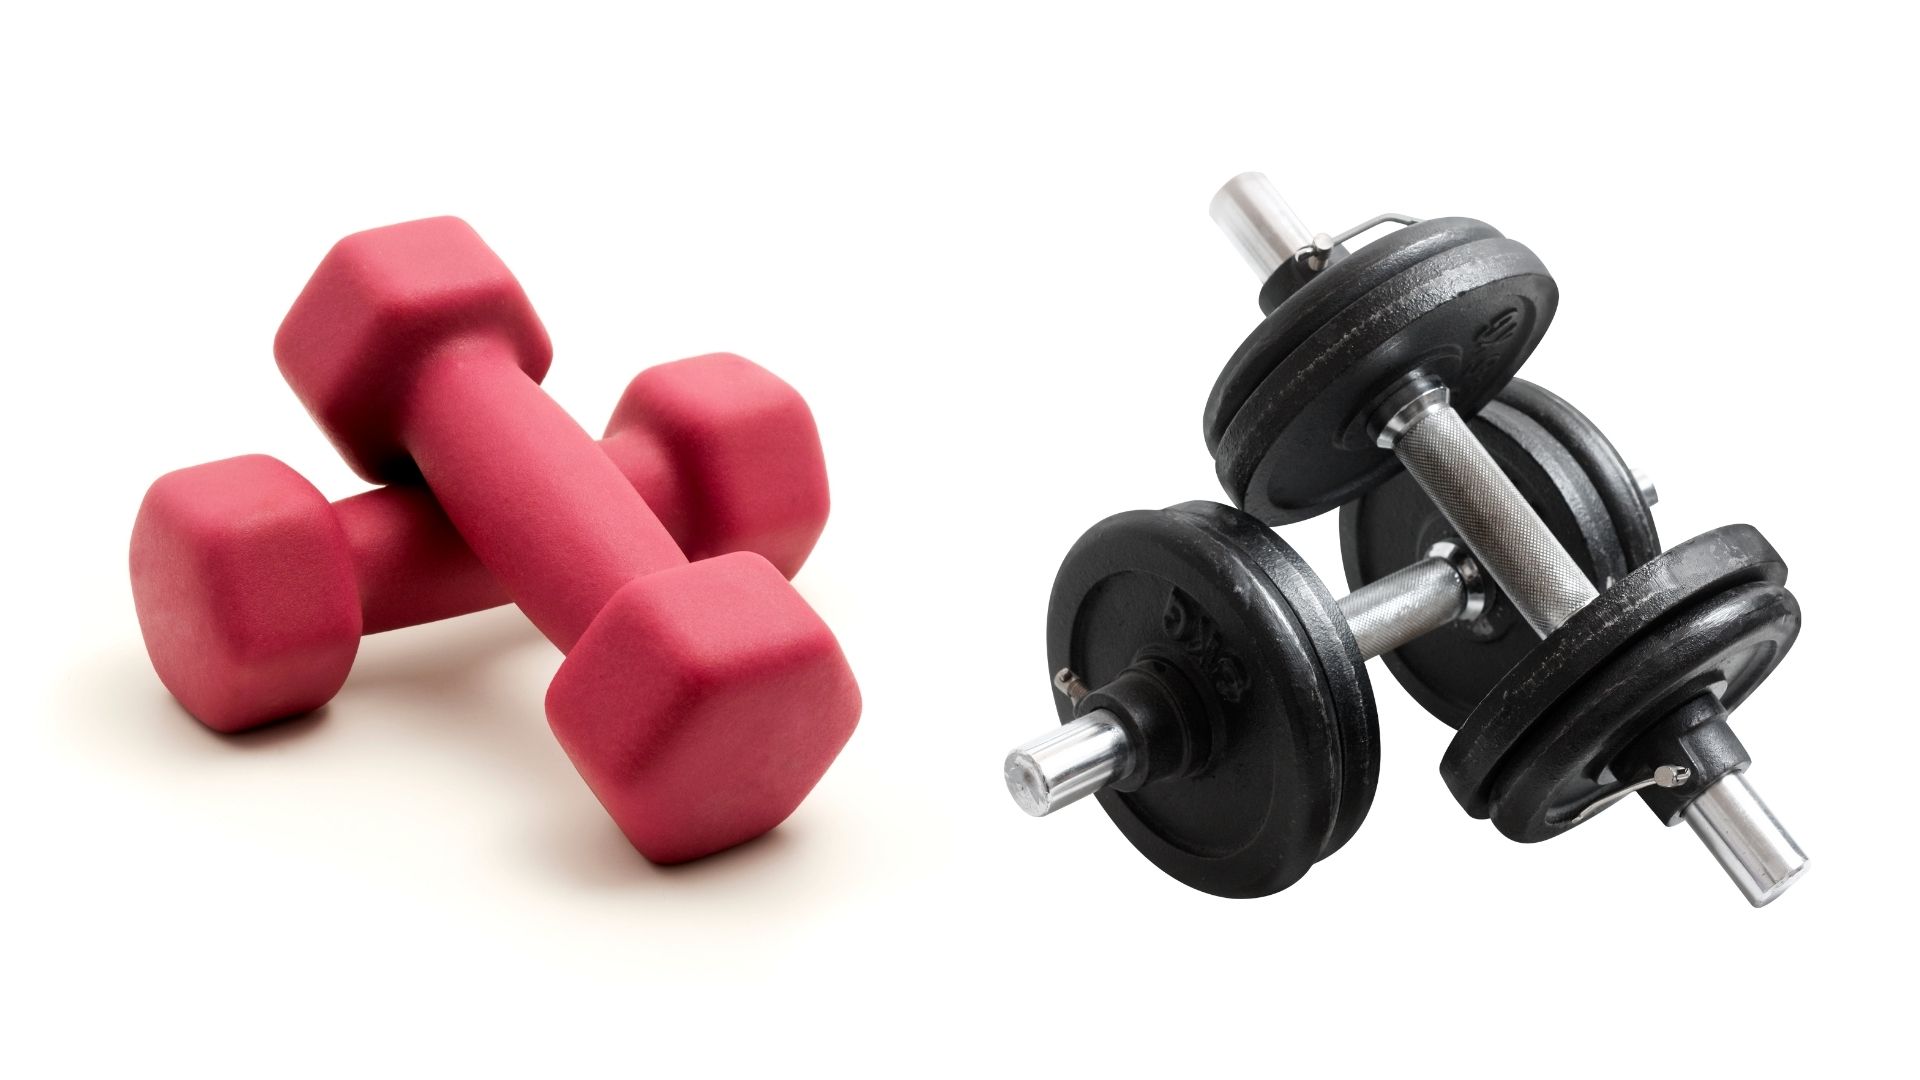 Dumbbells and Barbells, Golf Clubs and Accessories, Outdoor Adventure Equipment, Treadmills and Cardio Machines, Yoga Mats and Accessories on sale